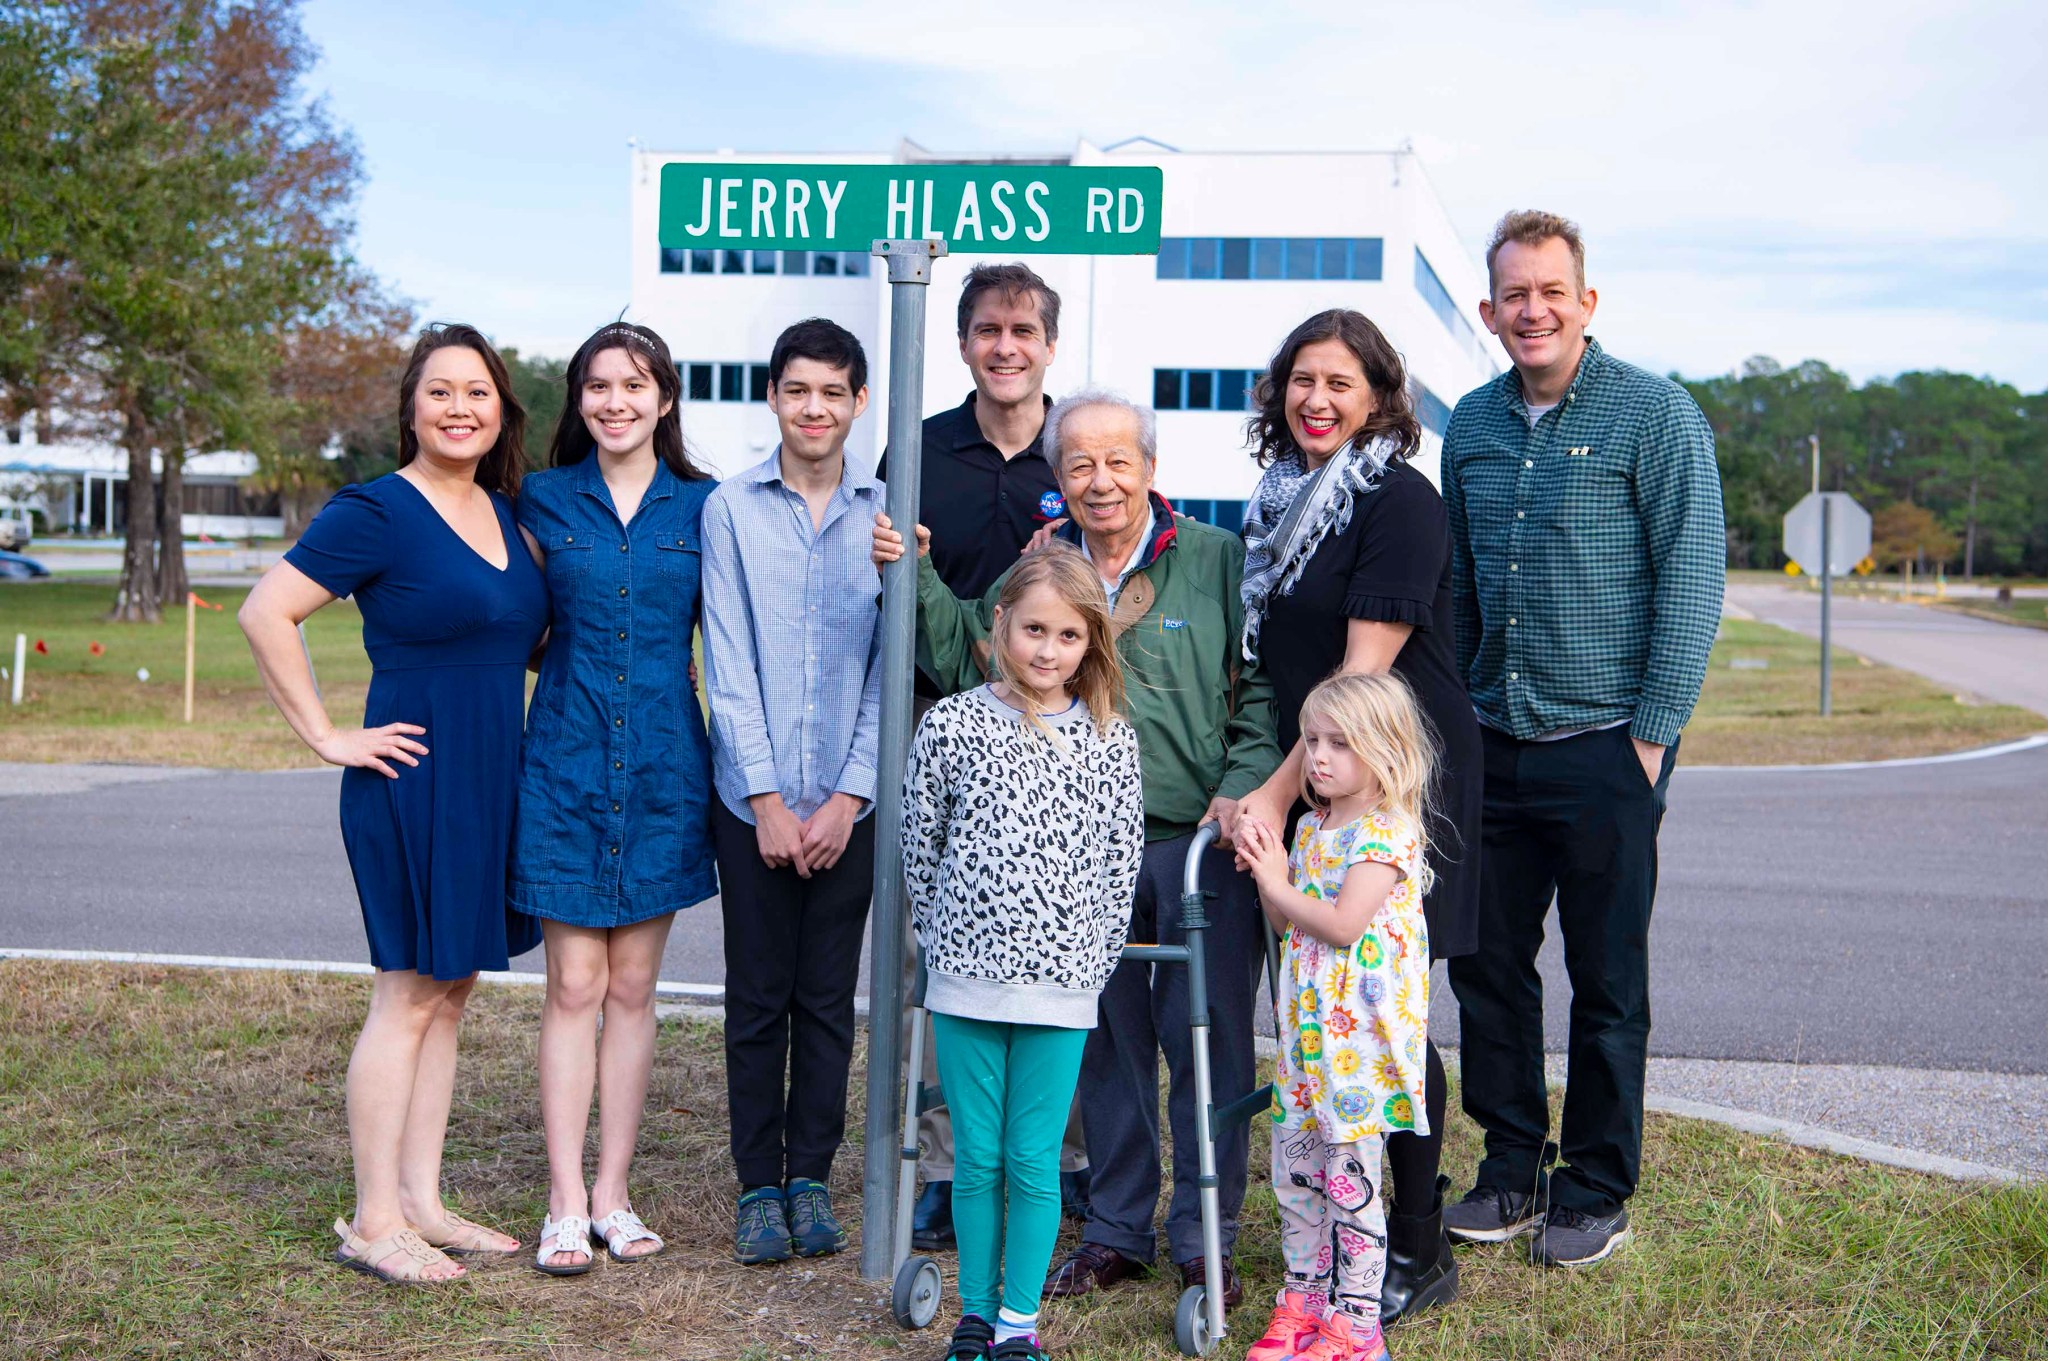 A family standing in front of street sign